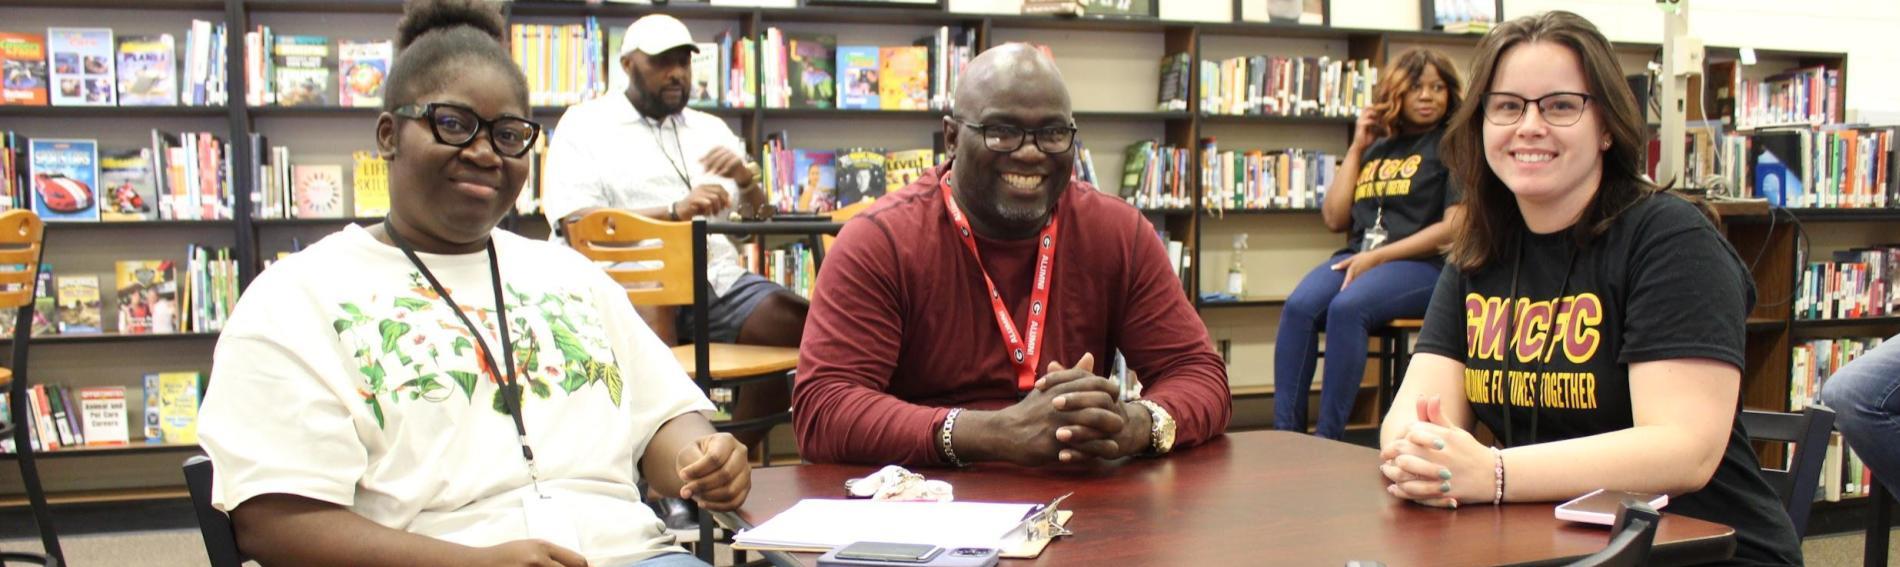 One male teacher and two female teachers smile at the camera while sitting at a table together in the media center